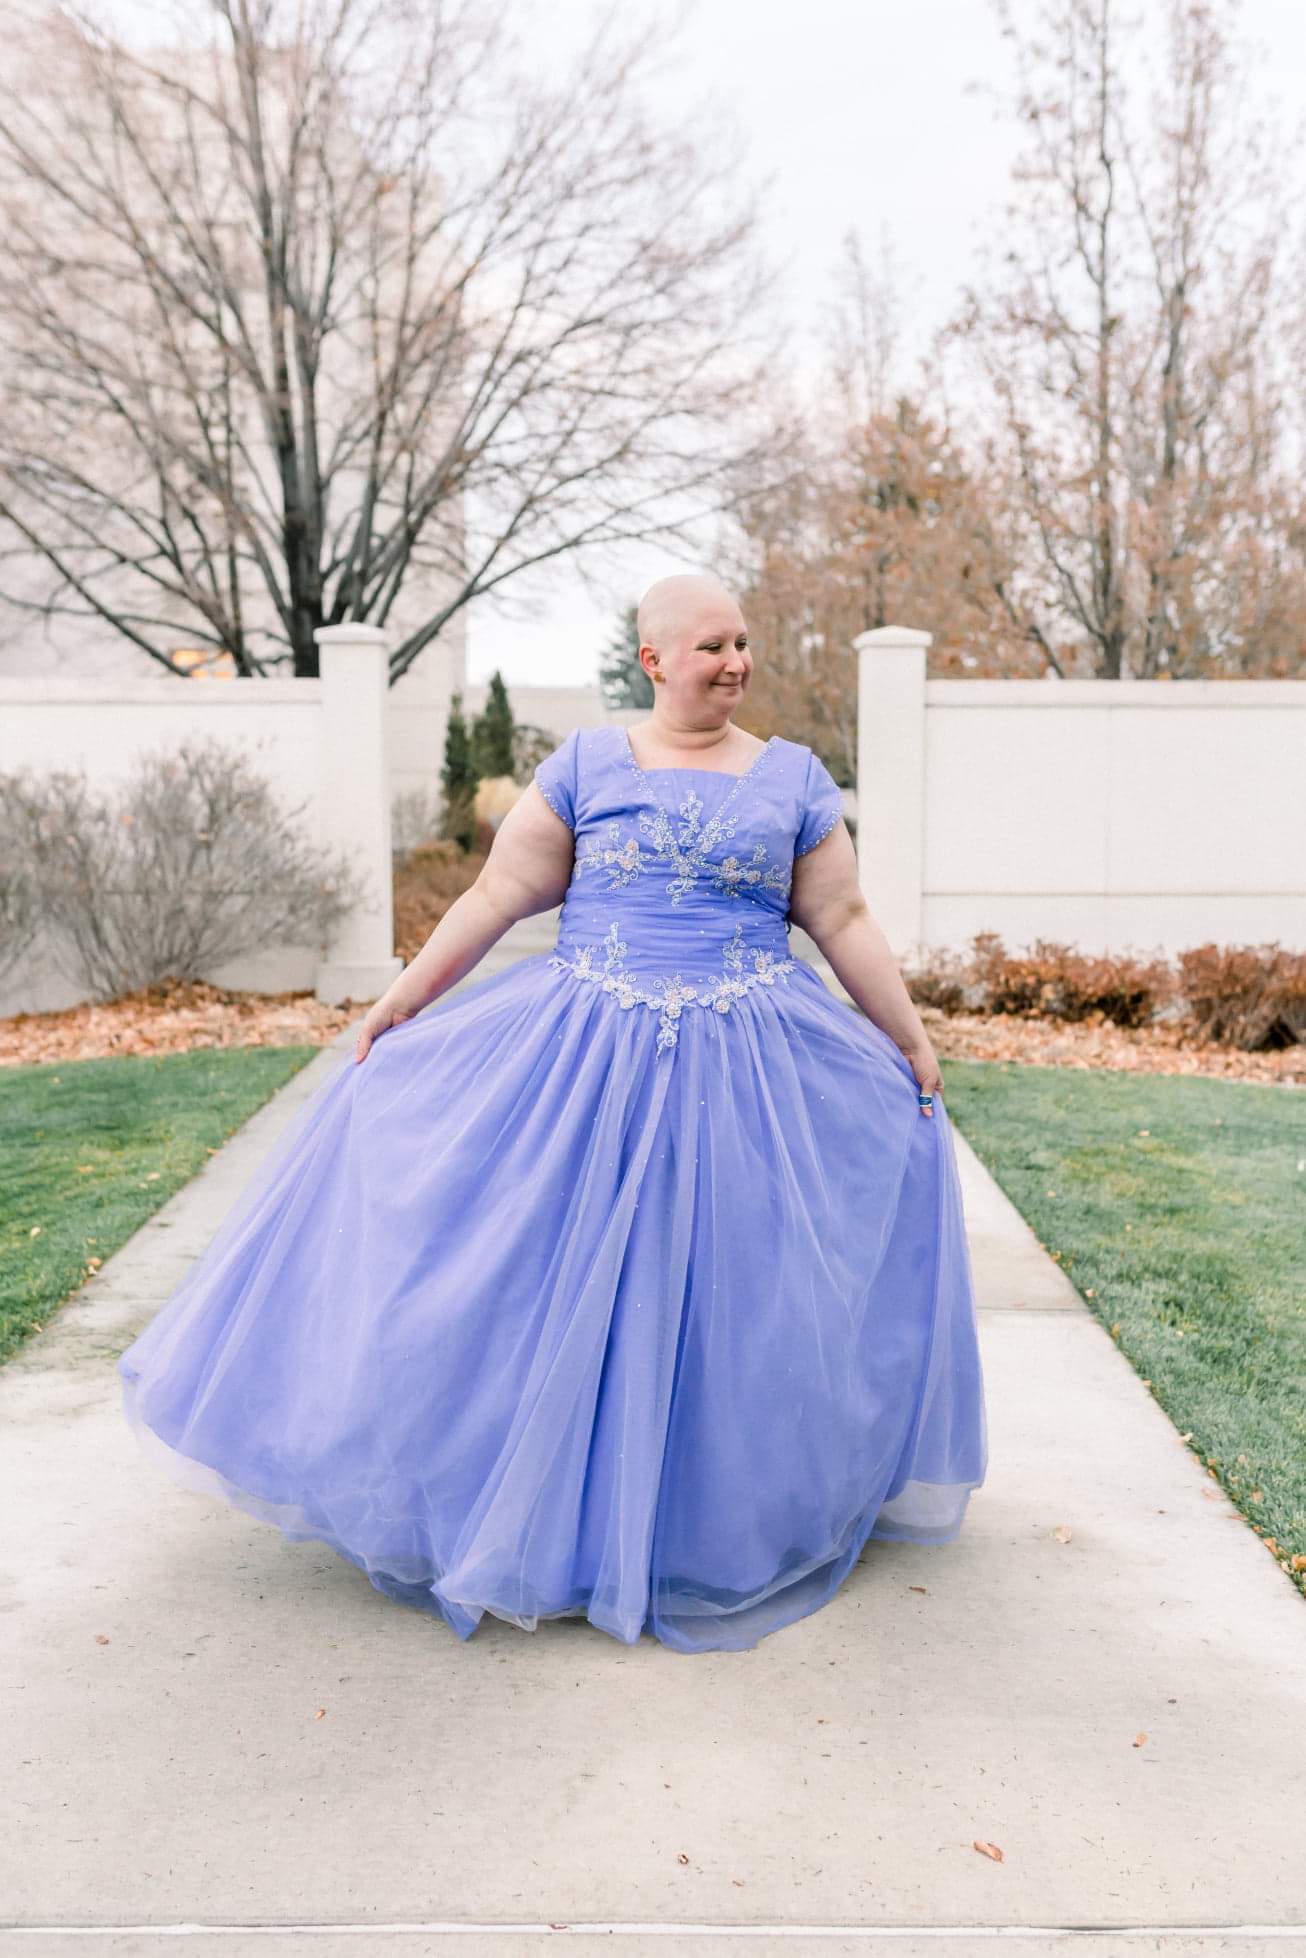 Cancer survivor walking down the sidewalk towards the camera in a purple flowy gown with a bald head.